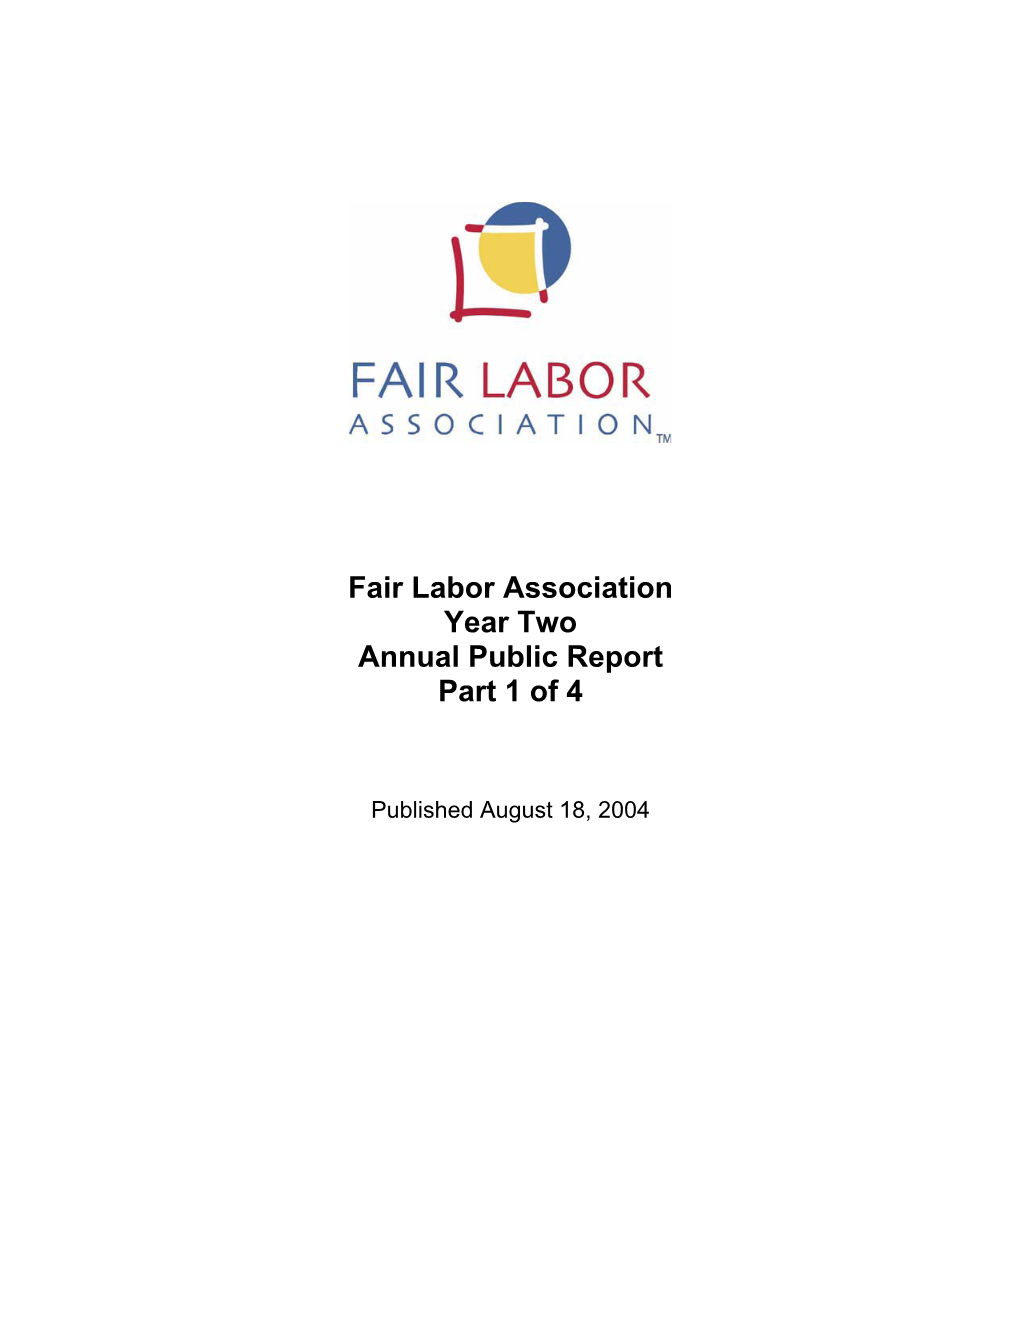 Fair Labor Association Year Two Annual Public Report Part 1 of 4